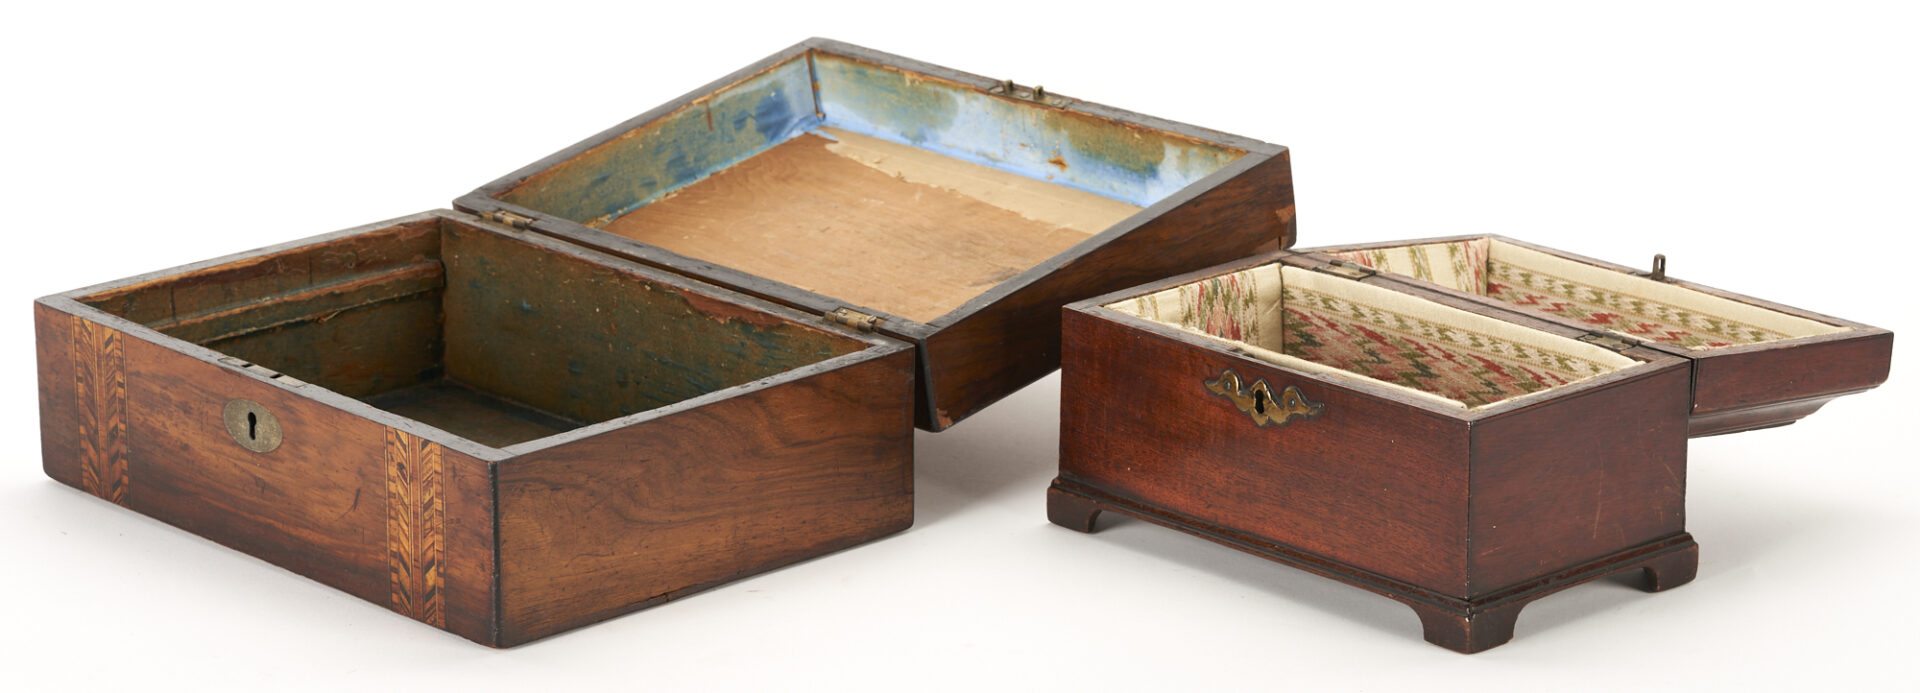 Lot 252: 6 Continental Wooden Boxes incl. Lap Desk with Stand, Tea Caddy